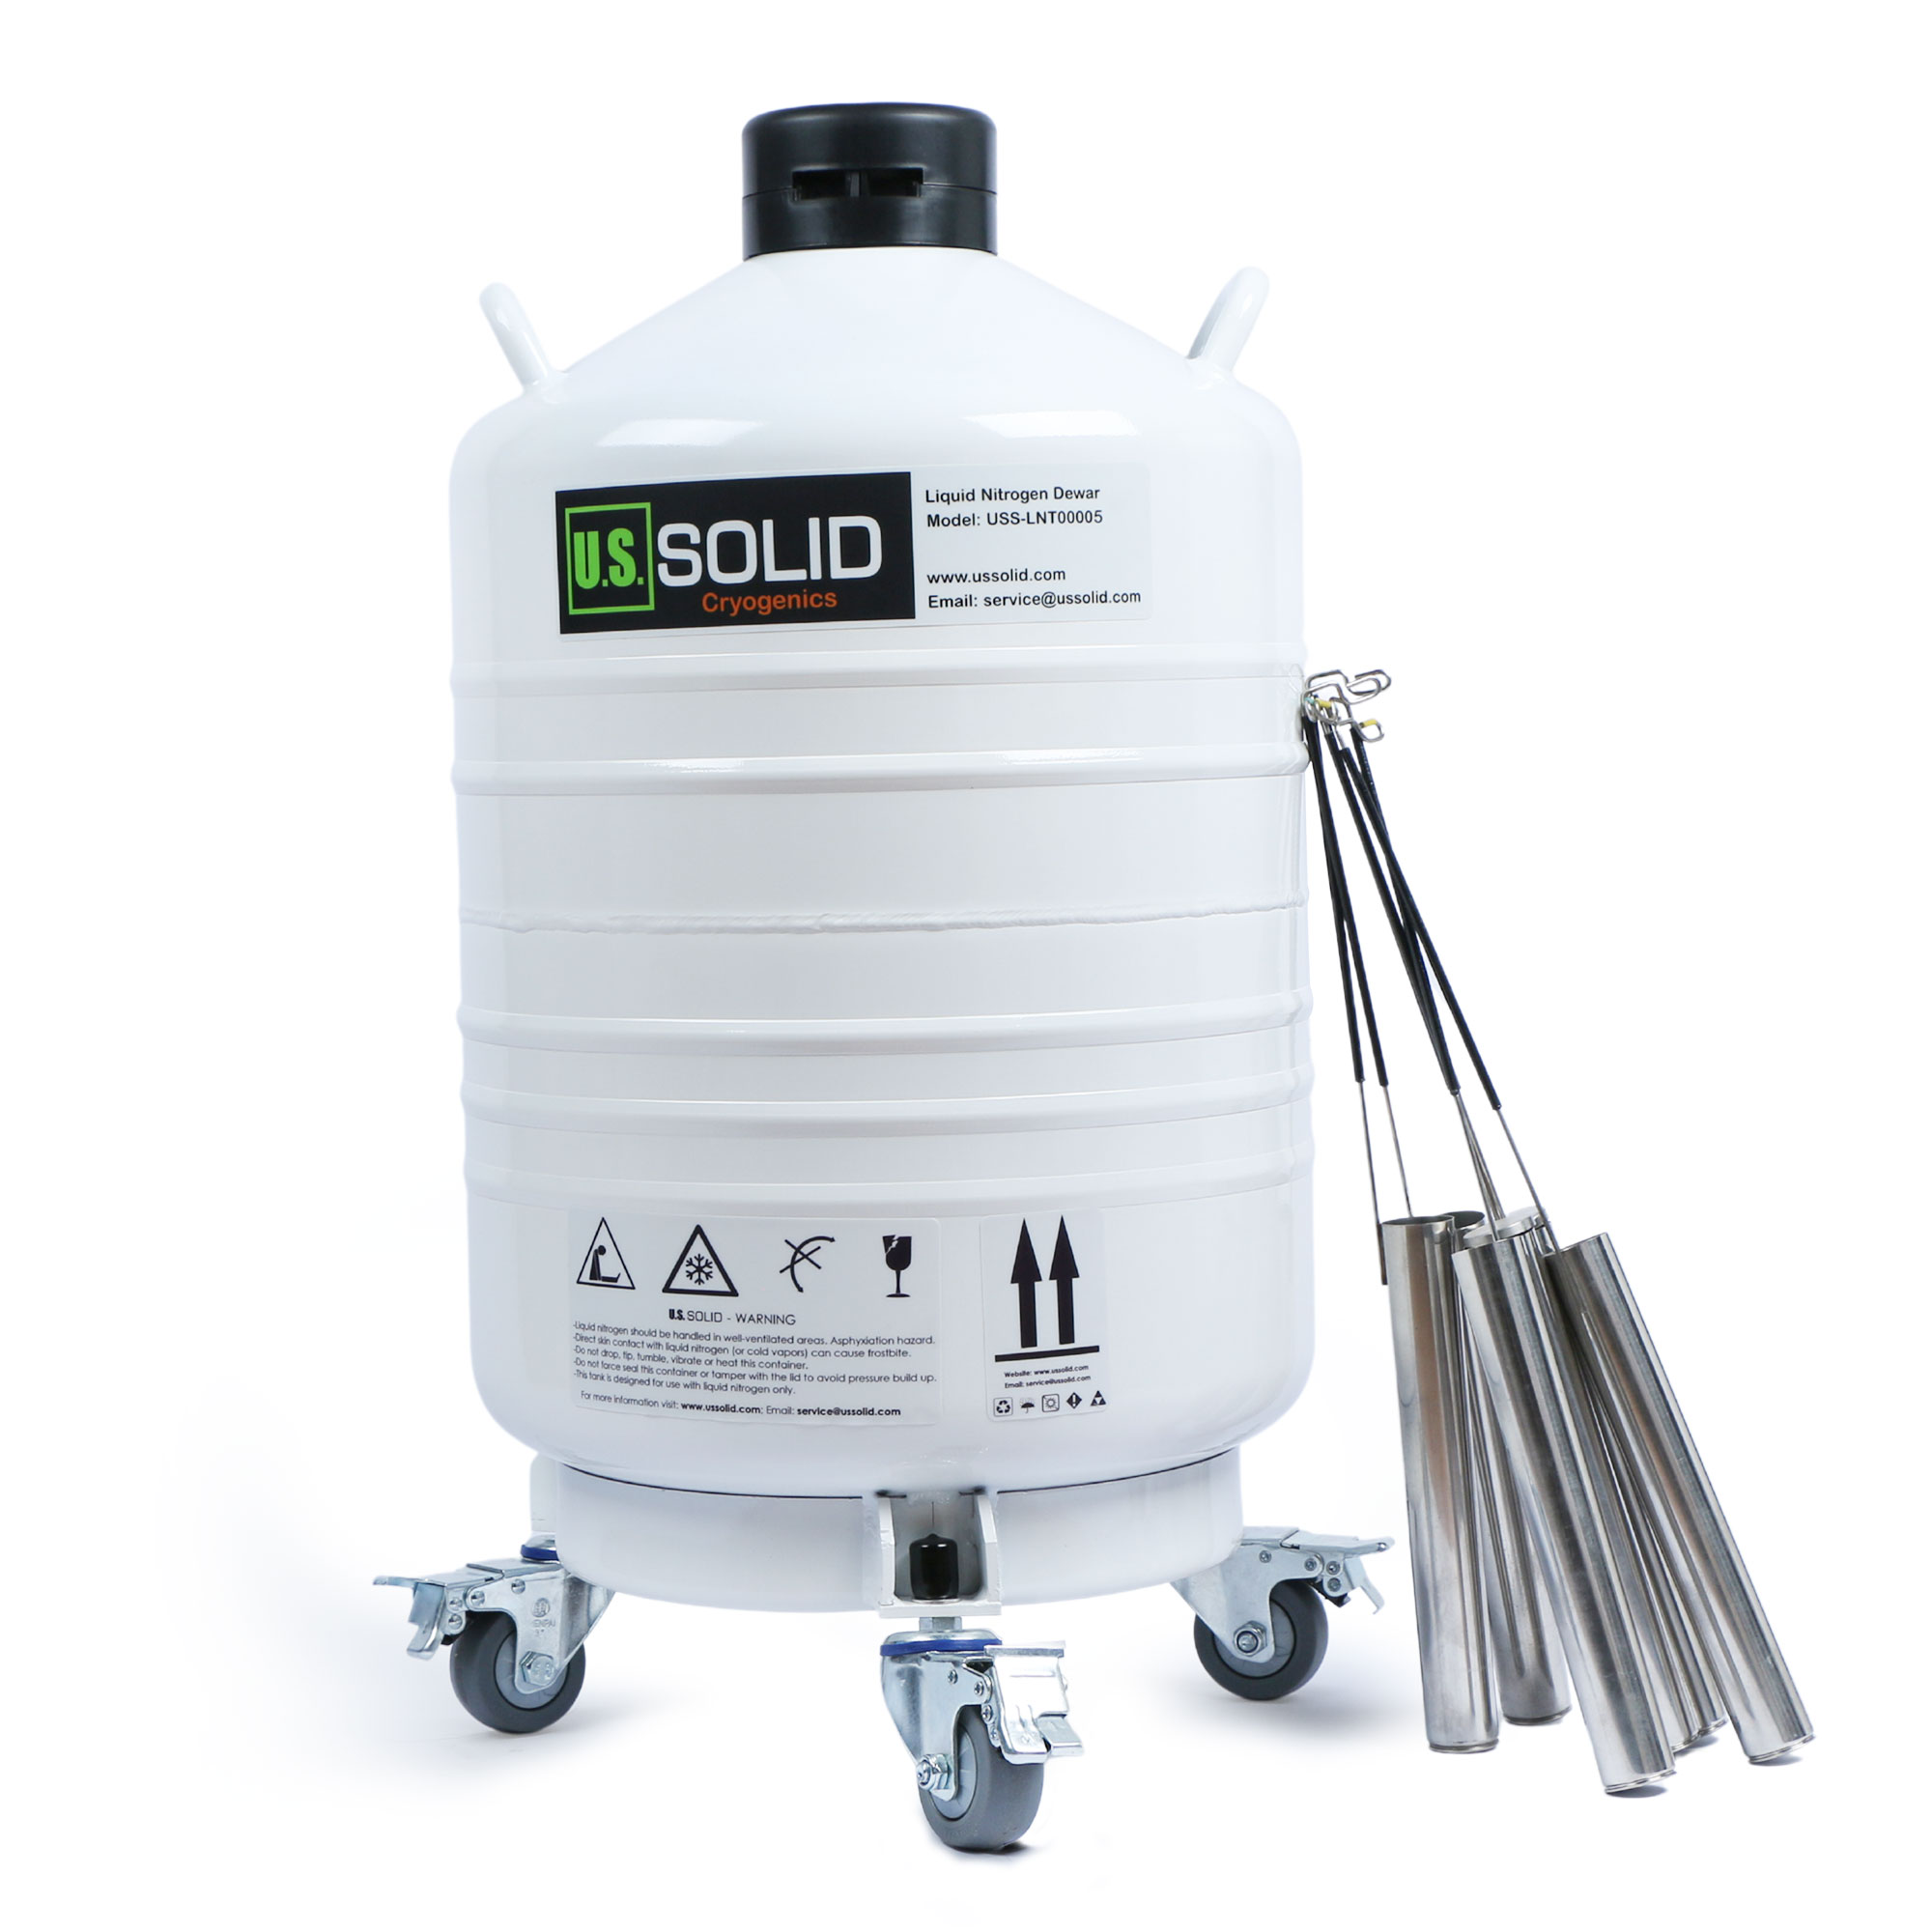 INPANOLS 3L Liquid Nitrogen Dewar, Cryogenic Nitrogen Container Tank with 3  Canisters & Carry Bag